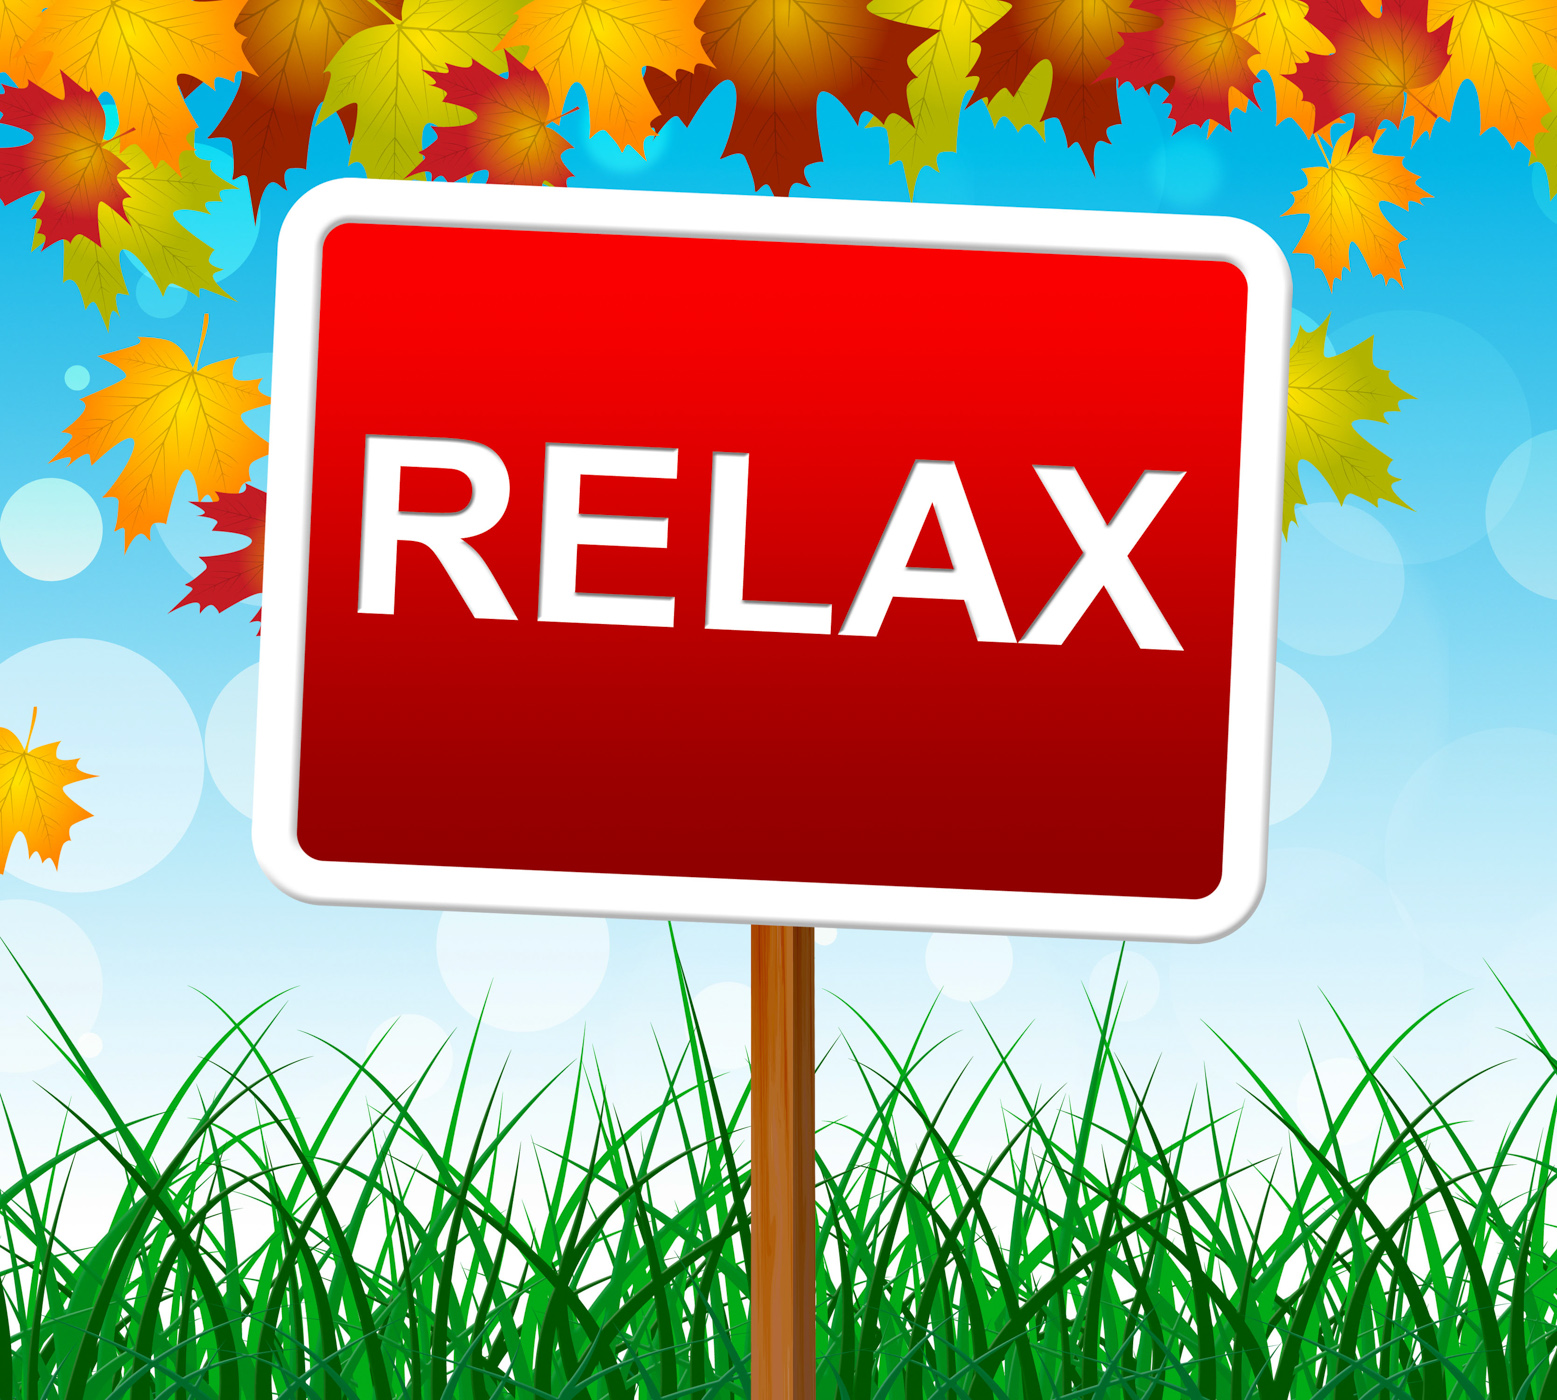 Relaxation relax indicates relief relaxing and recreation photo